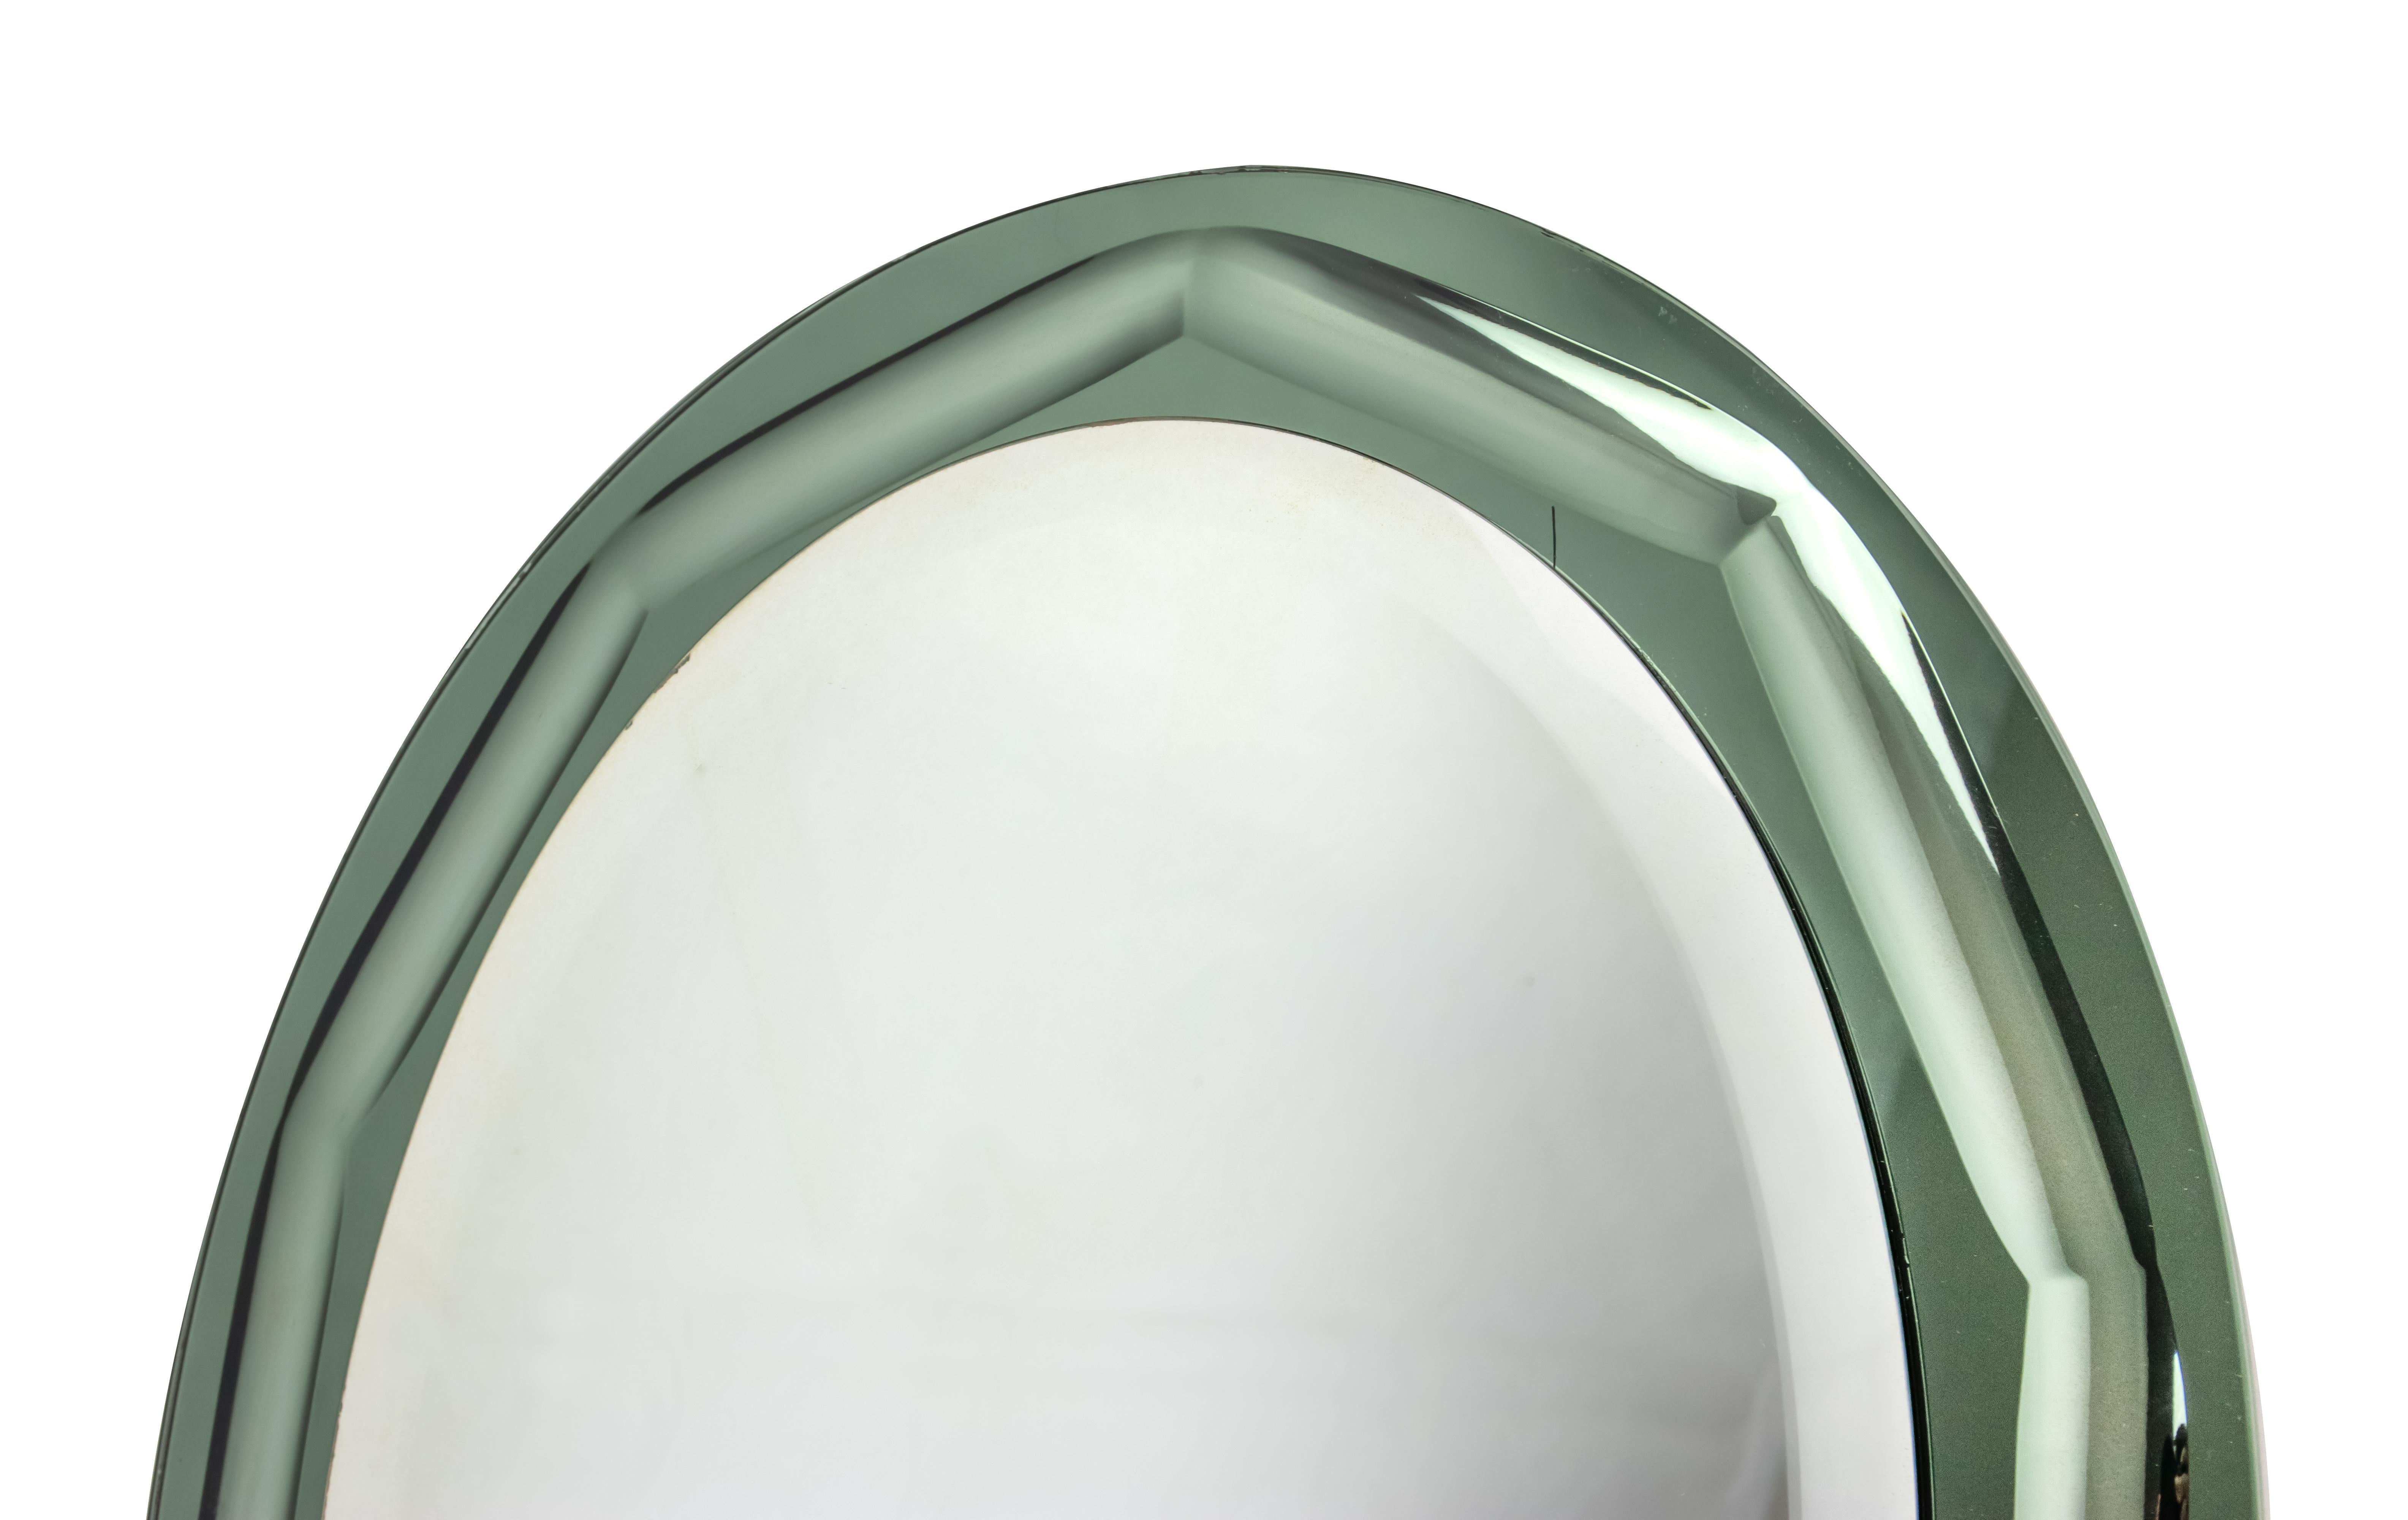 Vintage Oval Mirror by Lupi Cristal-Luxor, Italy 1970s.

H78 x D 63 cm.

Good conditions